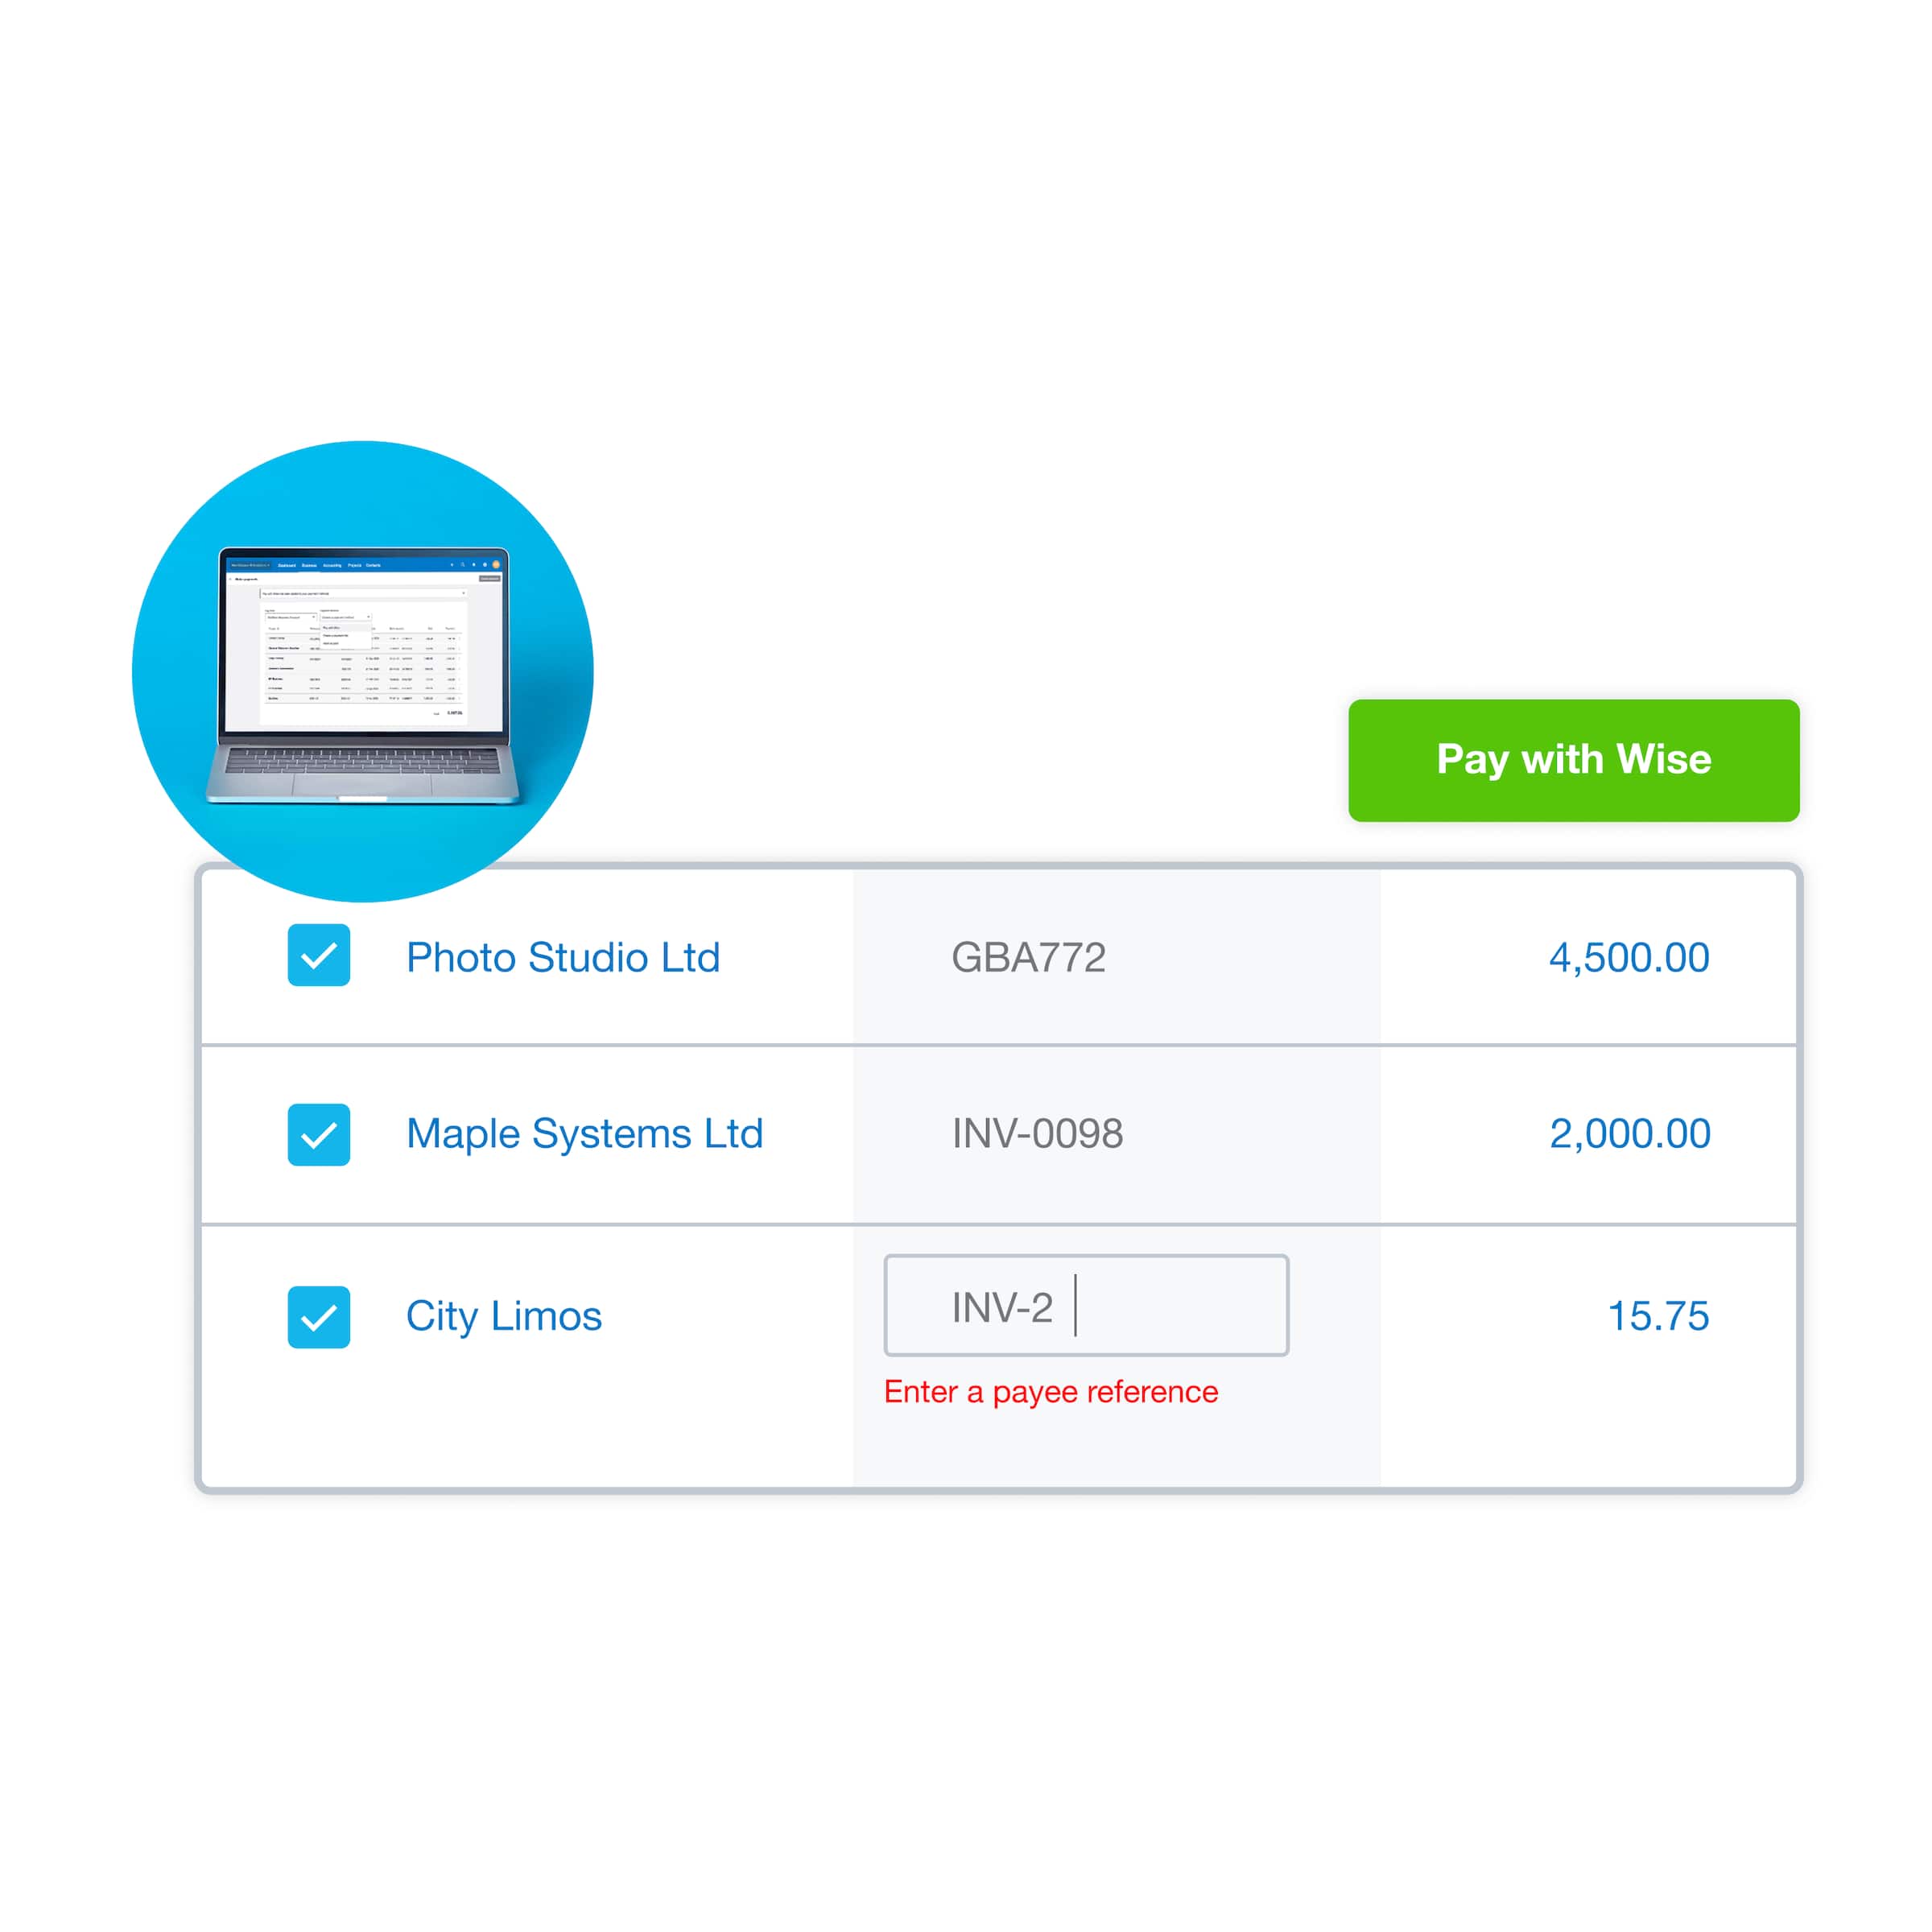 The payments screen displays an alert for a missing payee reference in a batch payment to be paid using Xero Pay with Wise.